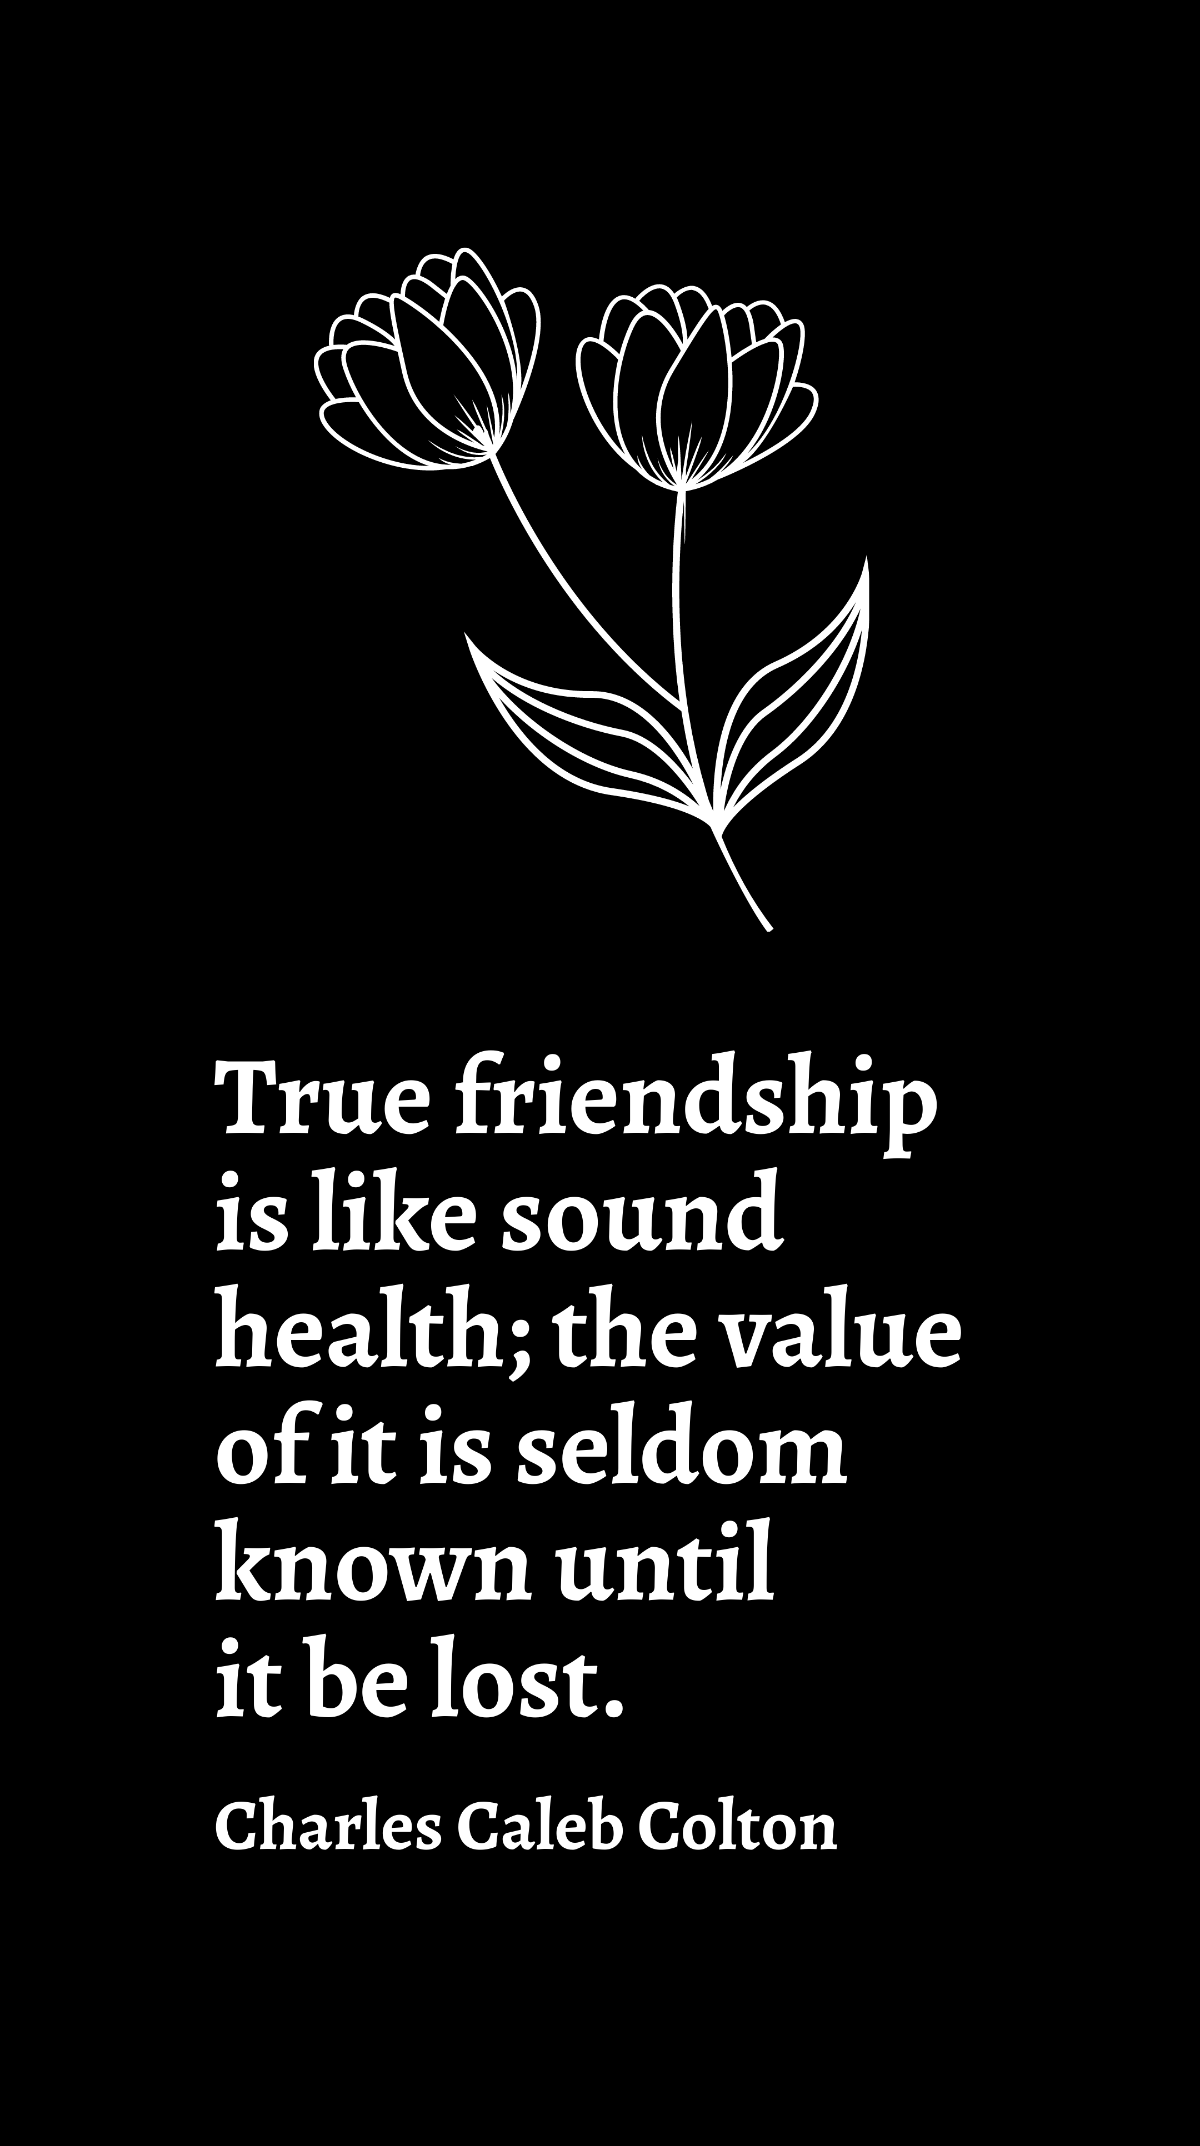 Charles Caleb Colton - True friendship is like sound health; the value of it is seldom known until it be lost. Template